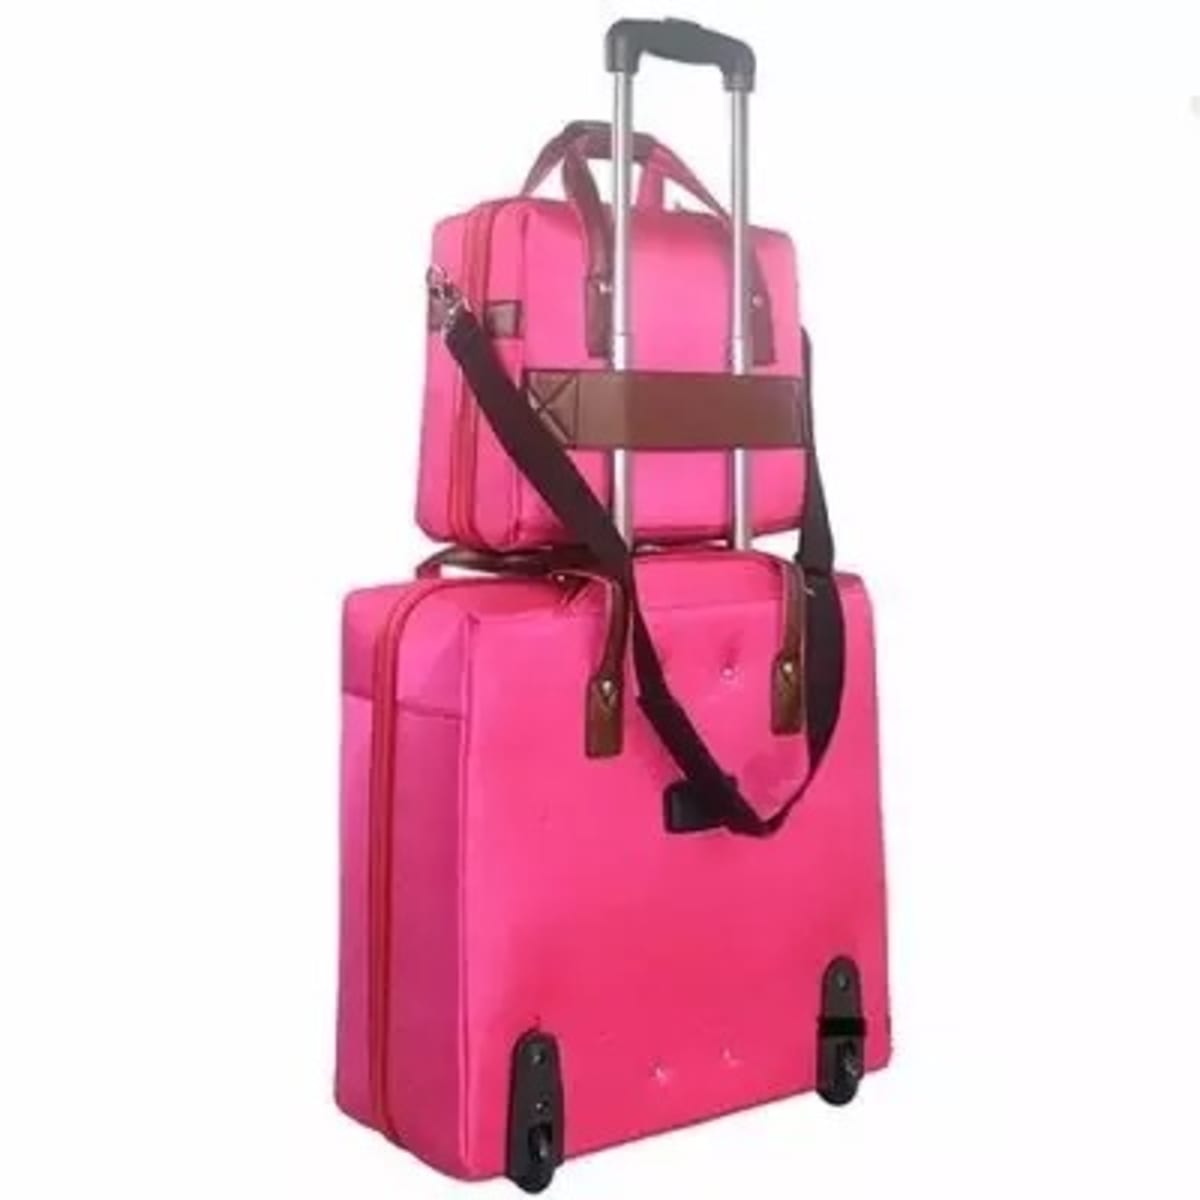 Travelling luggage bag- 2 in 1 - Pink